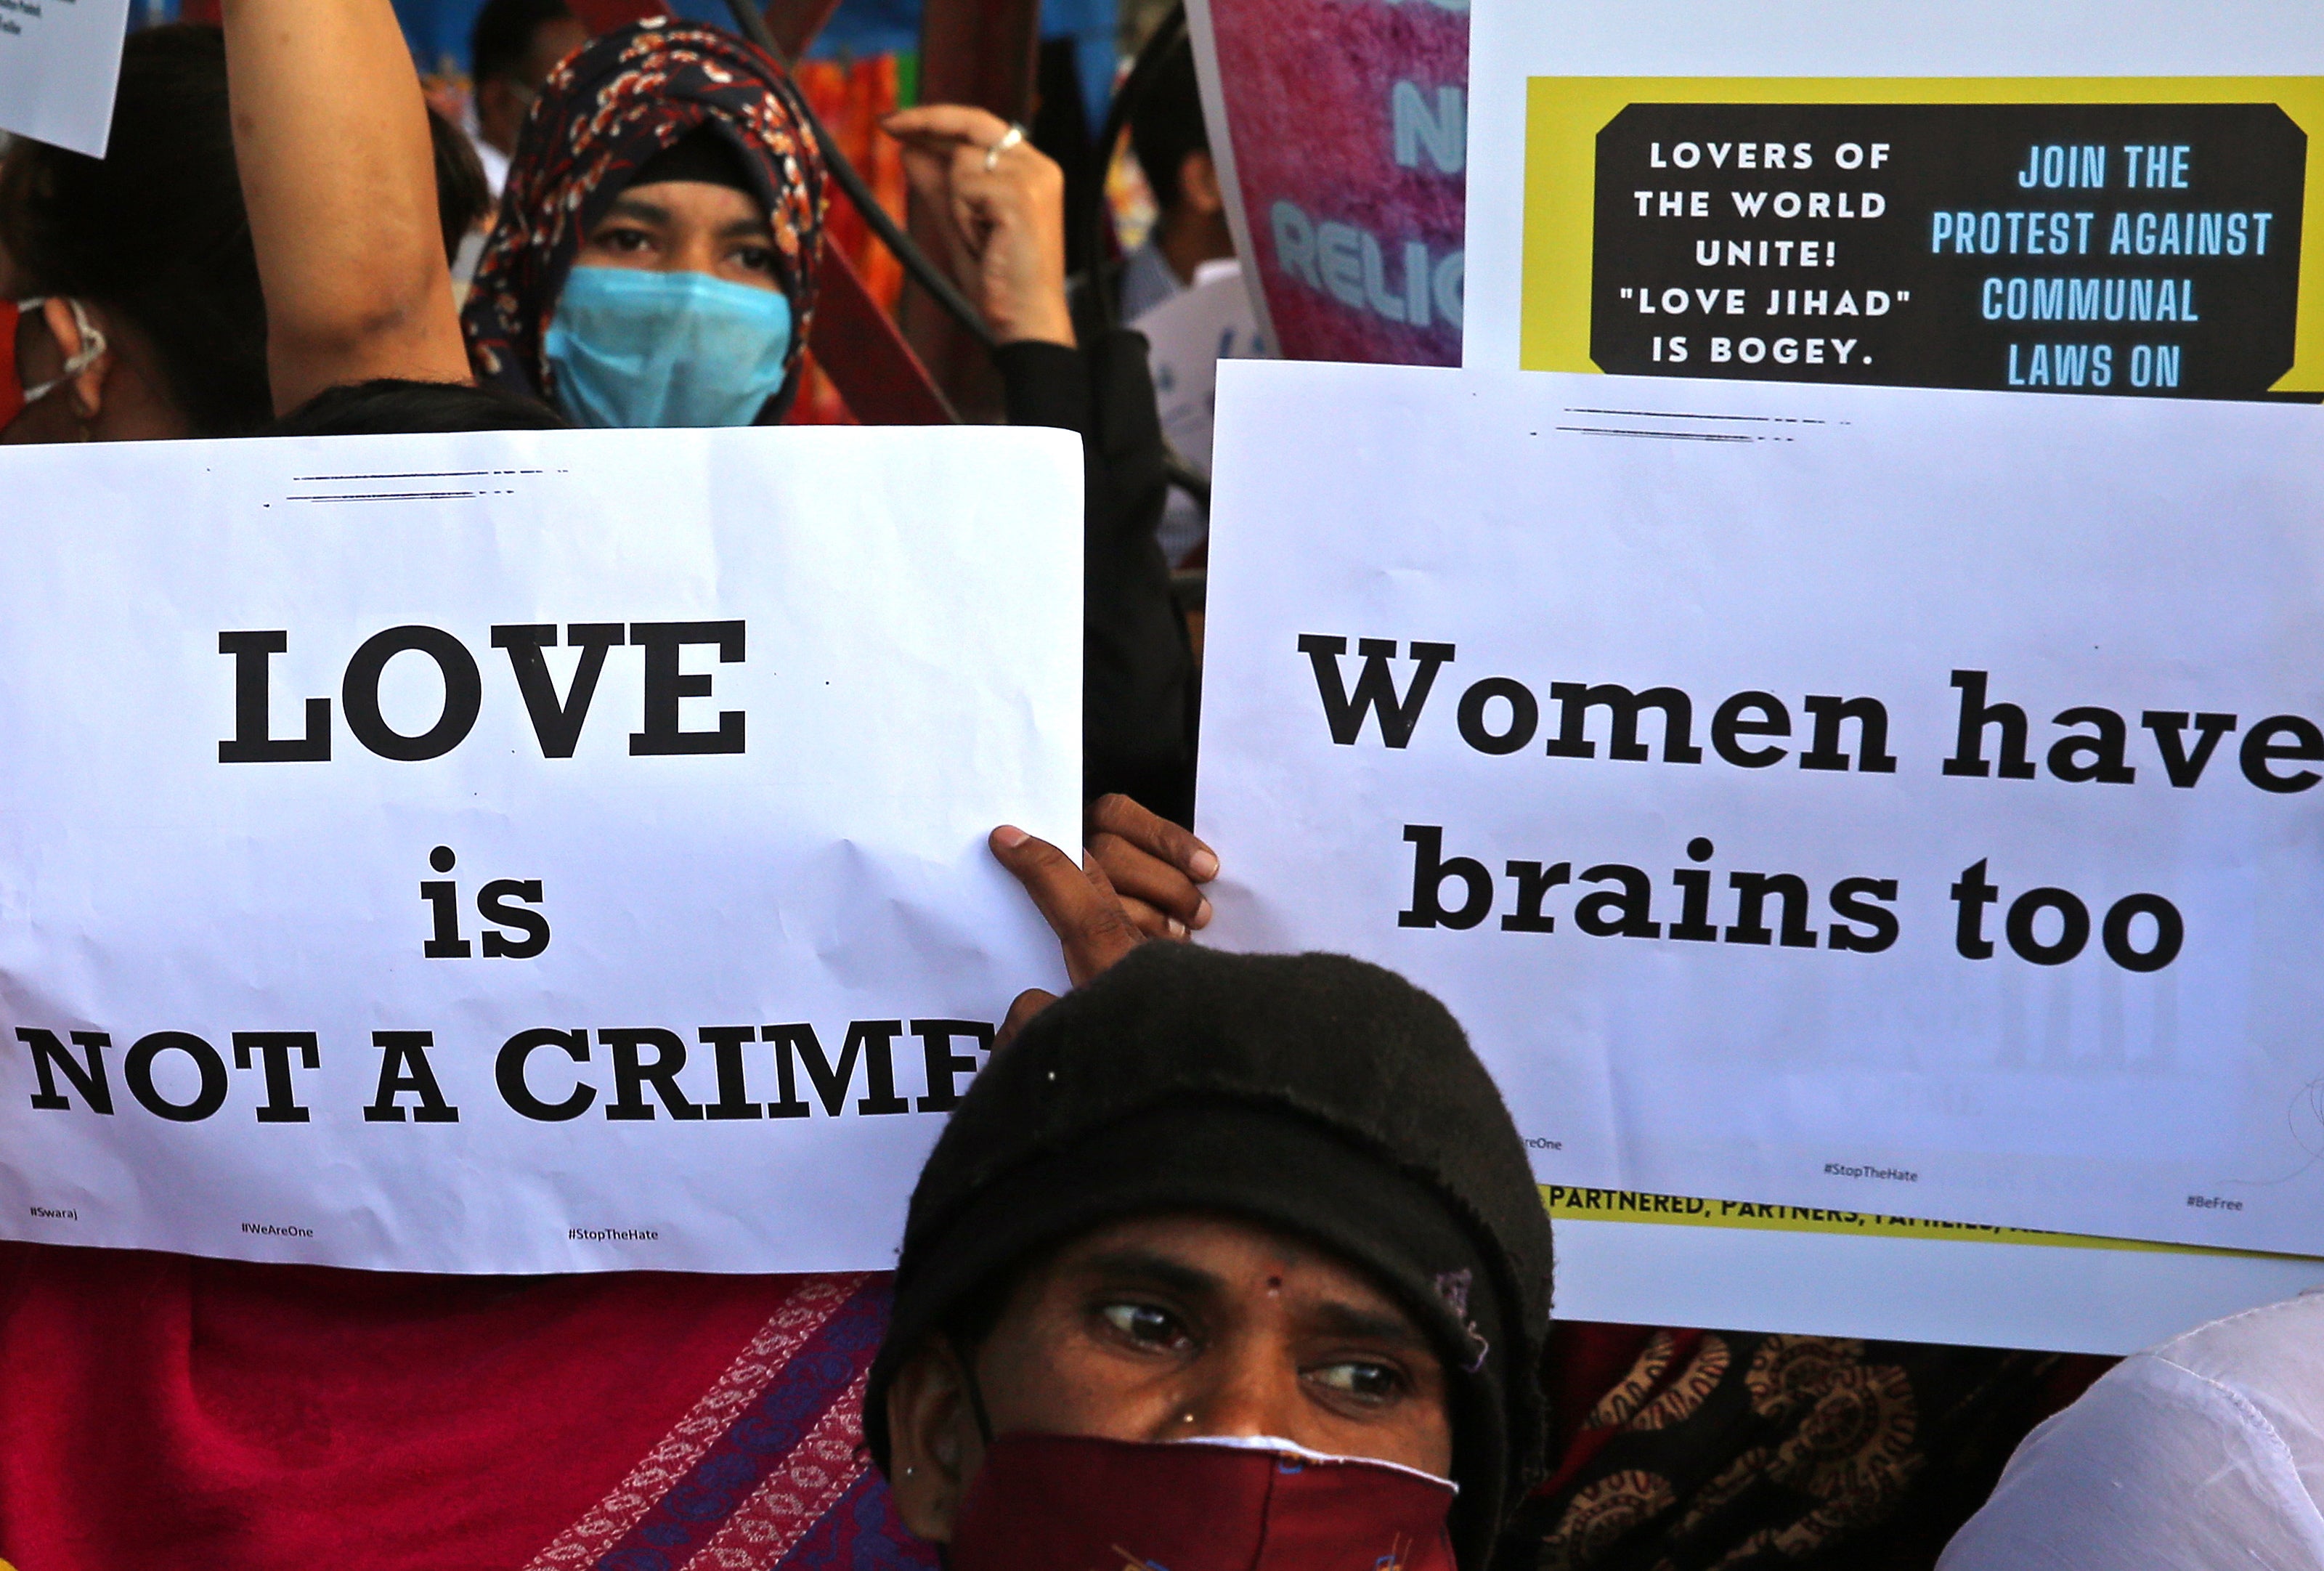 File image: People from different human rights organisations hold placards during a protest against BJP-lead government and Chief Minister of Uttar Pradesh Yogi Adityanath over the so-called 'Love Jihad' law, in Bangalore